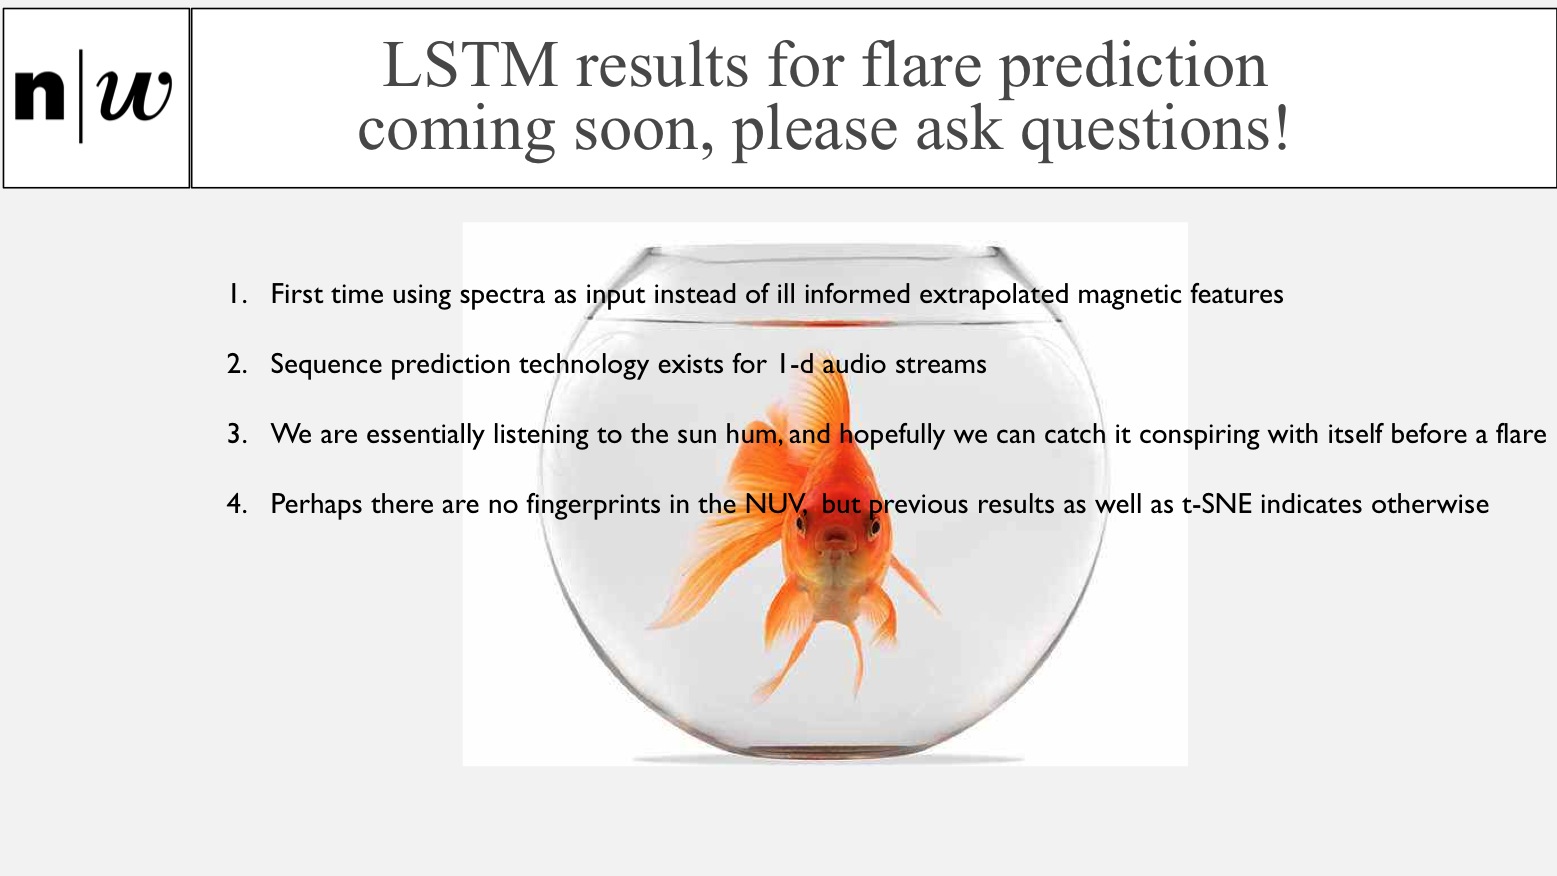 LSTM results for flare prediction coming soon, please ask questions!